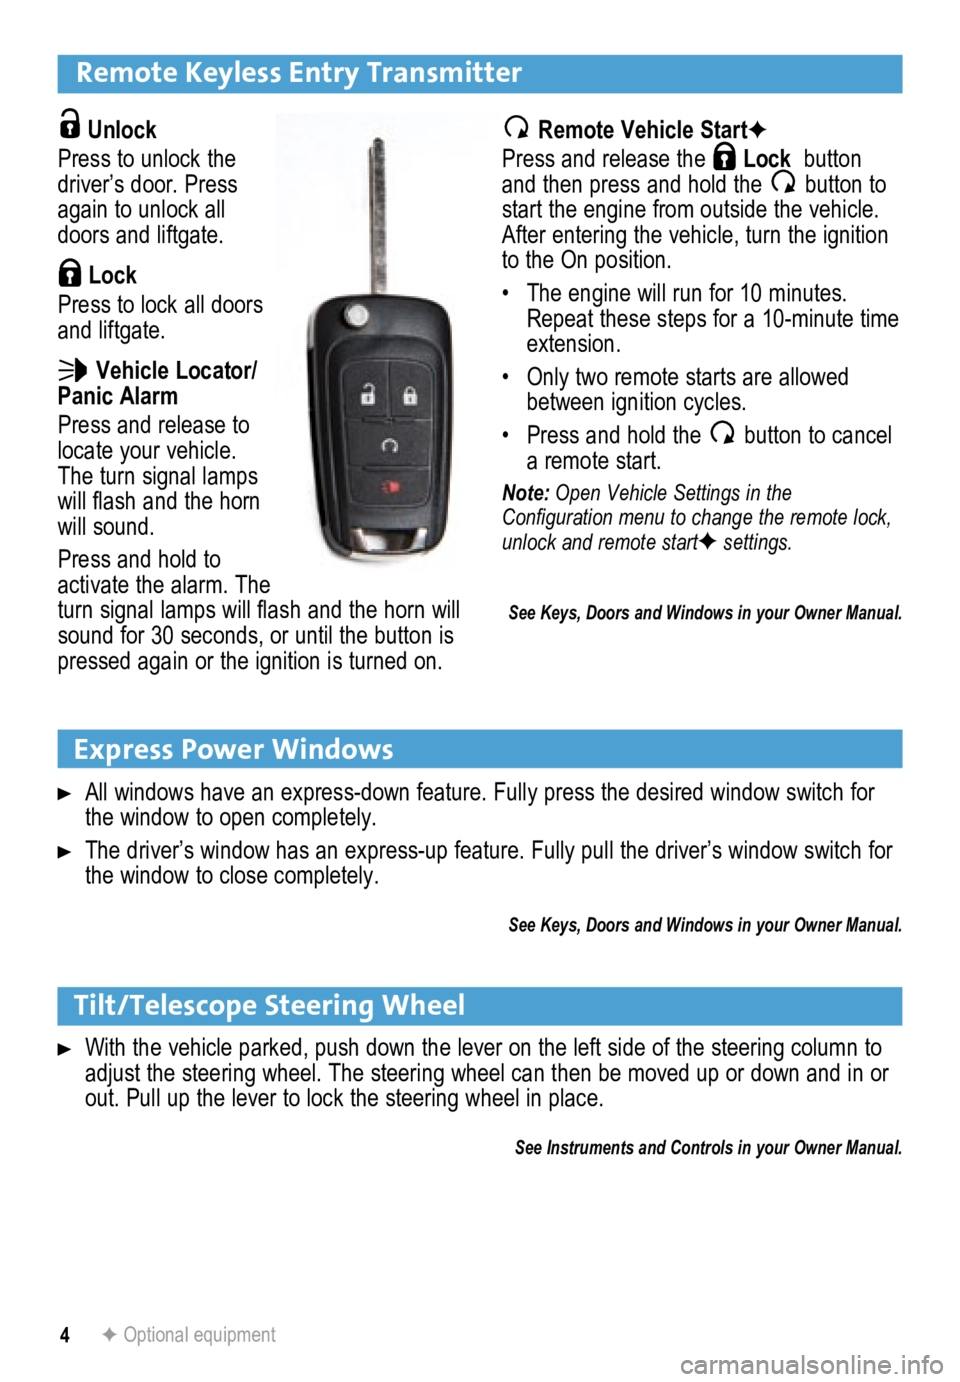 BUICK ENCORE 2013  Get To Know Guide 4
Remote Keyless Entry Transmitter
 Unlock 
Press to unlock the 
driver’s door. Press 
again to unlock all 
doors and liftgate.
 Lock 
Press to lock all doors 
and liftgate. 
 Vehicle Locator/ 
Pani